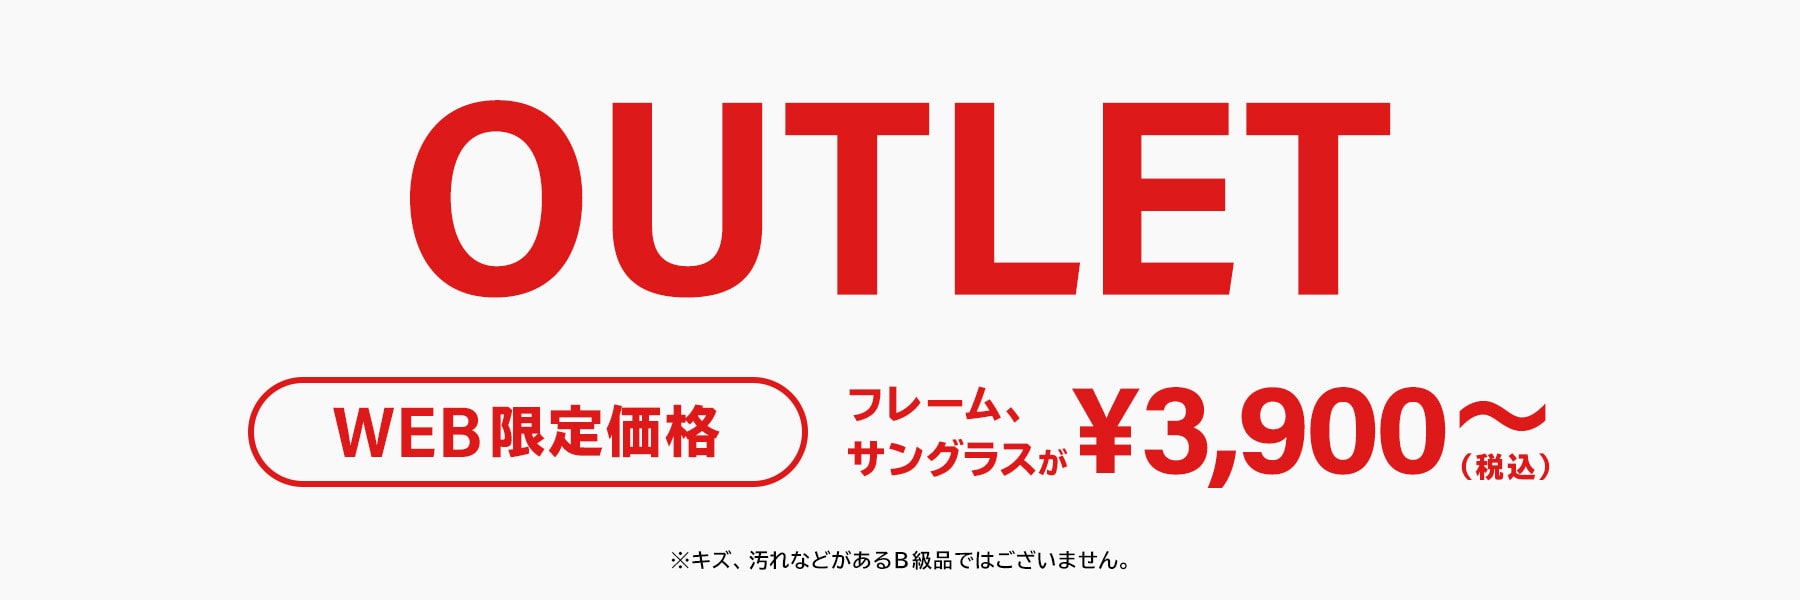 OUTLET WEB限定価格